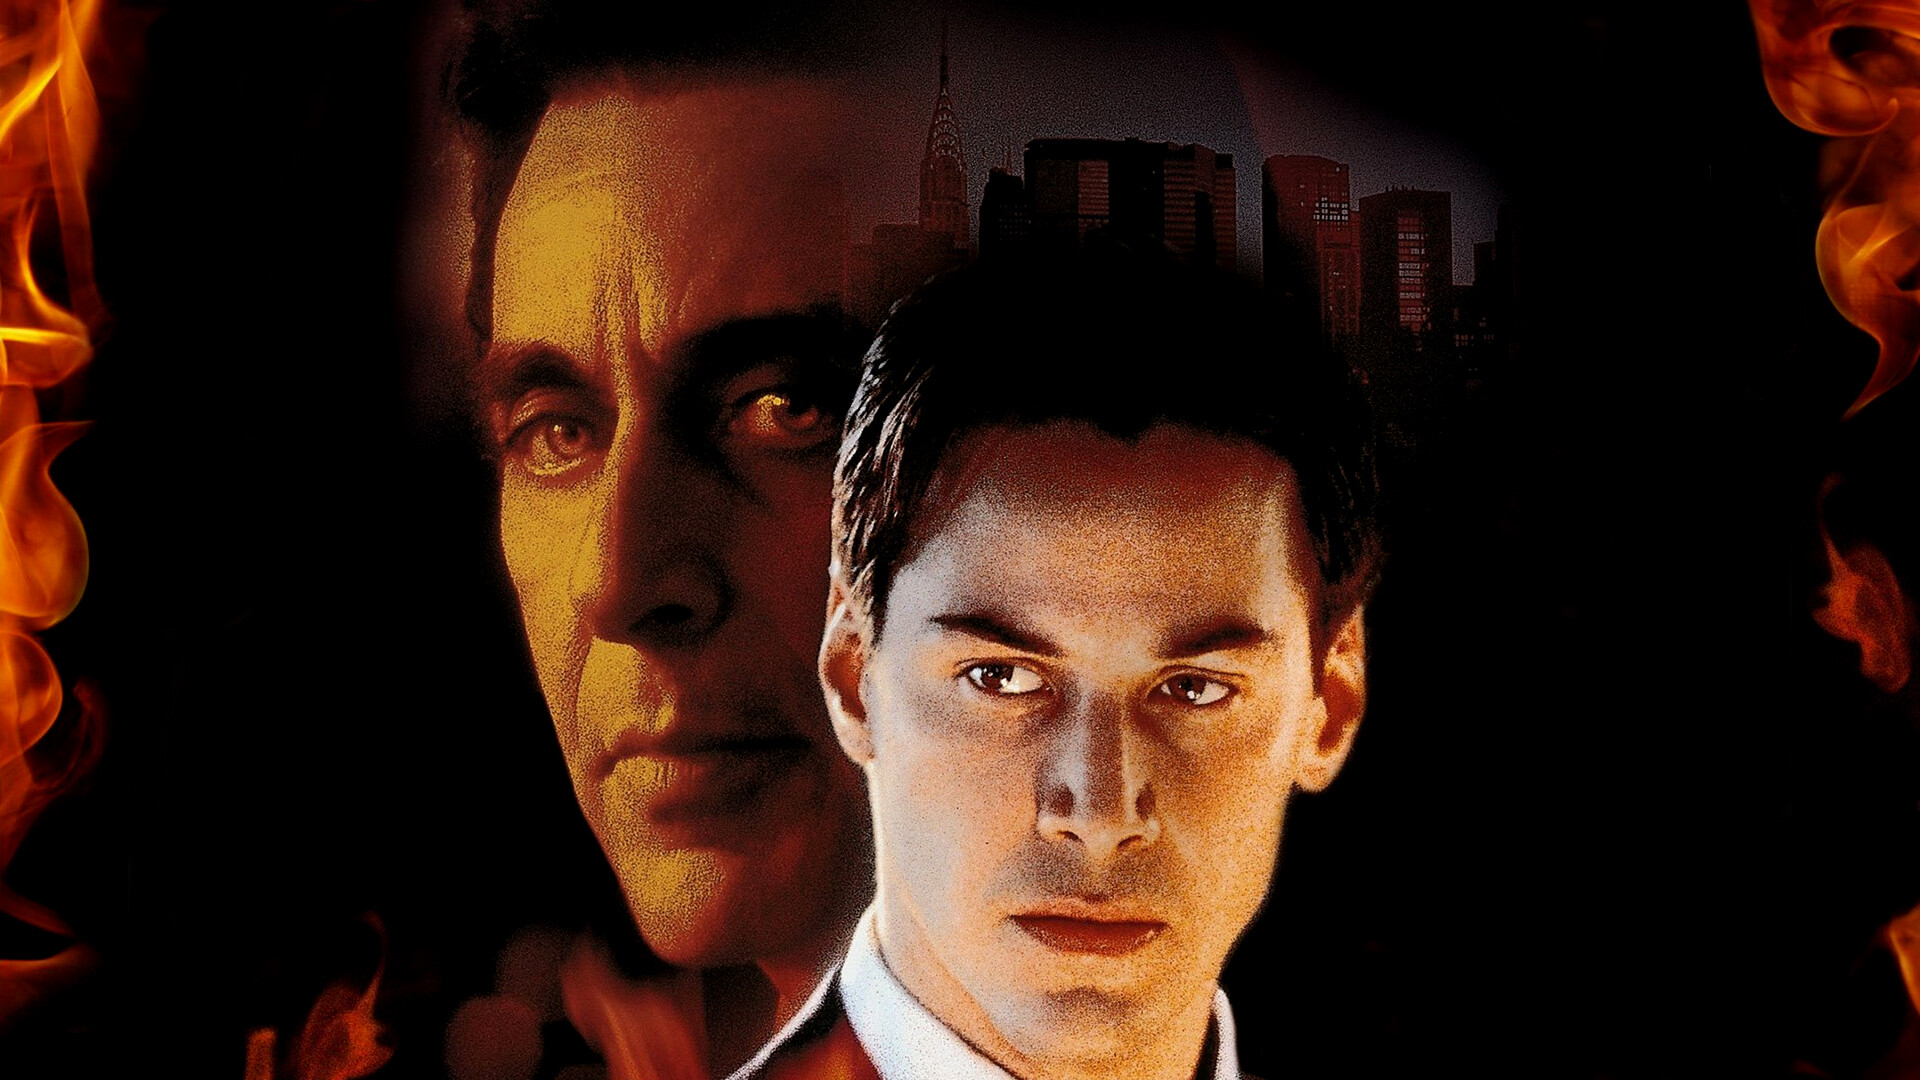 The Devil's Advocate (Movie): Taylor Hackford's mystery thriller based on Andrew Nyderman's novel of the same name. 1920x1080 Full HD Wallpaper.